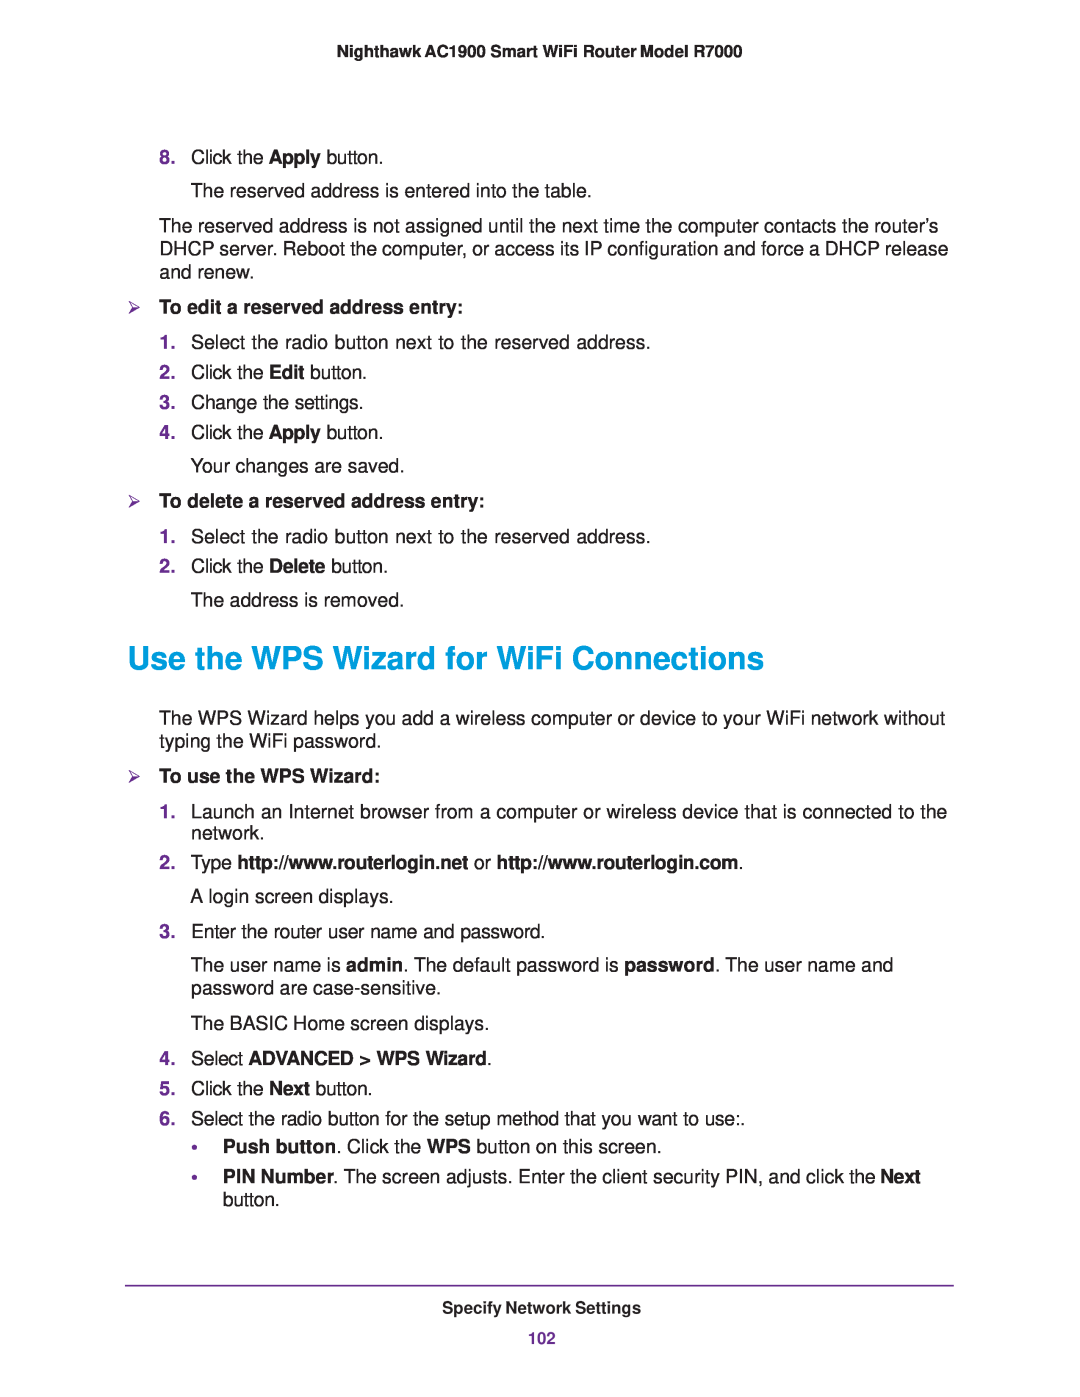 NETGEAR R7000 Use the WPS Wizard for WiFi Connections,  To edit a reserved address entry,  To use the WPS Wizard 